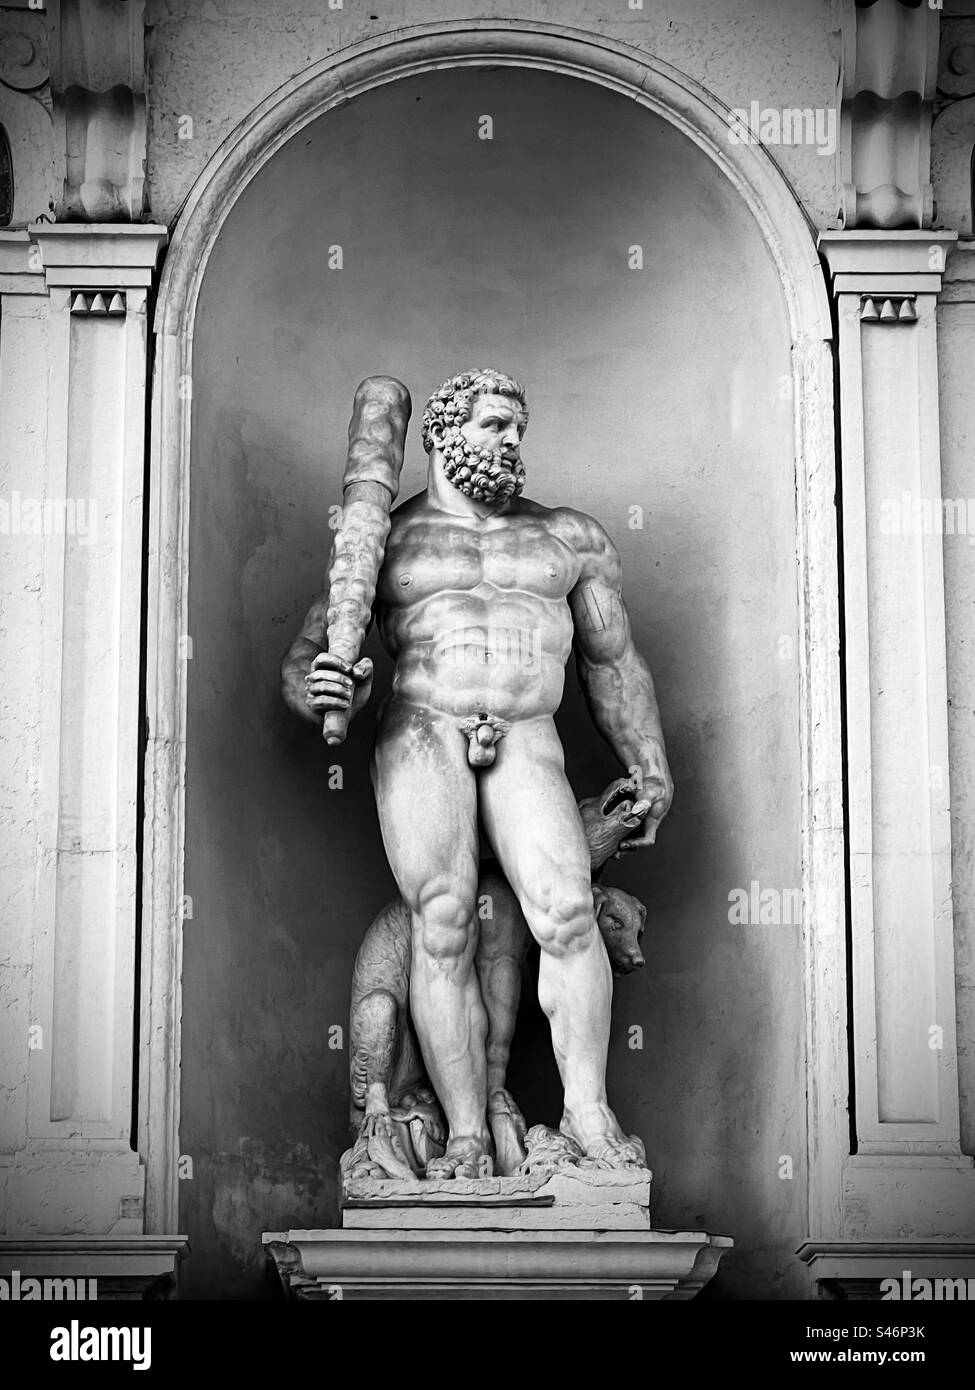 Statue of Hercules with a club and Cerberus, a multi-headed dog, in a portal next to the entrance of Palazzo Ducale in Modena, Italy Stock Photo